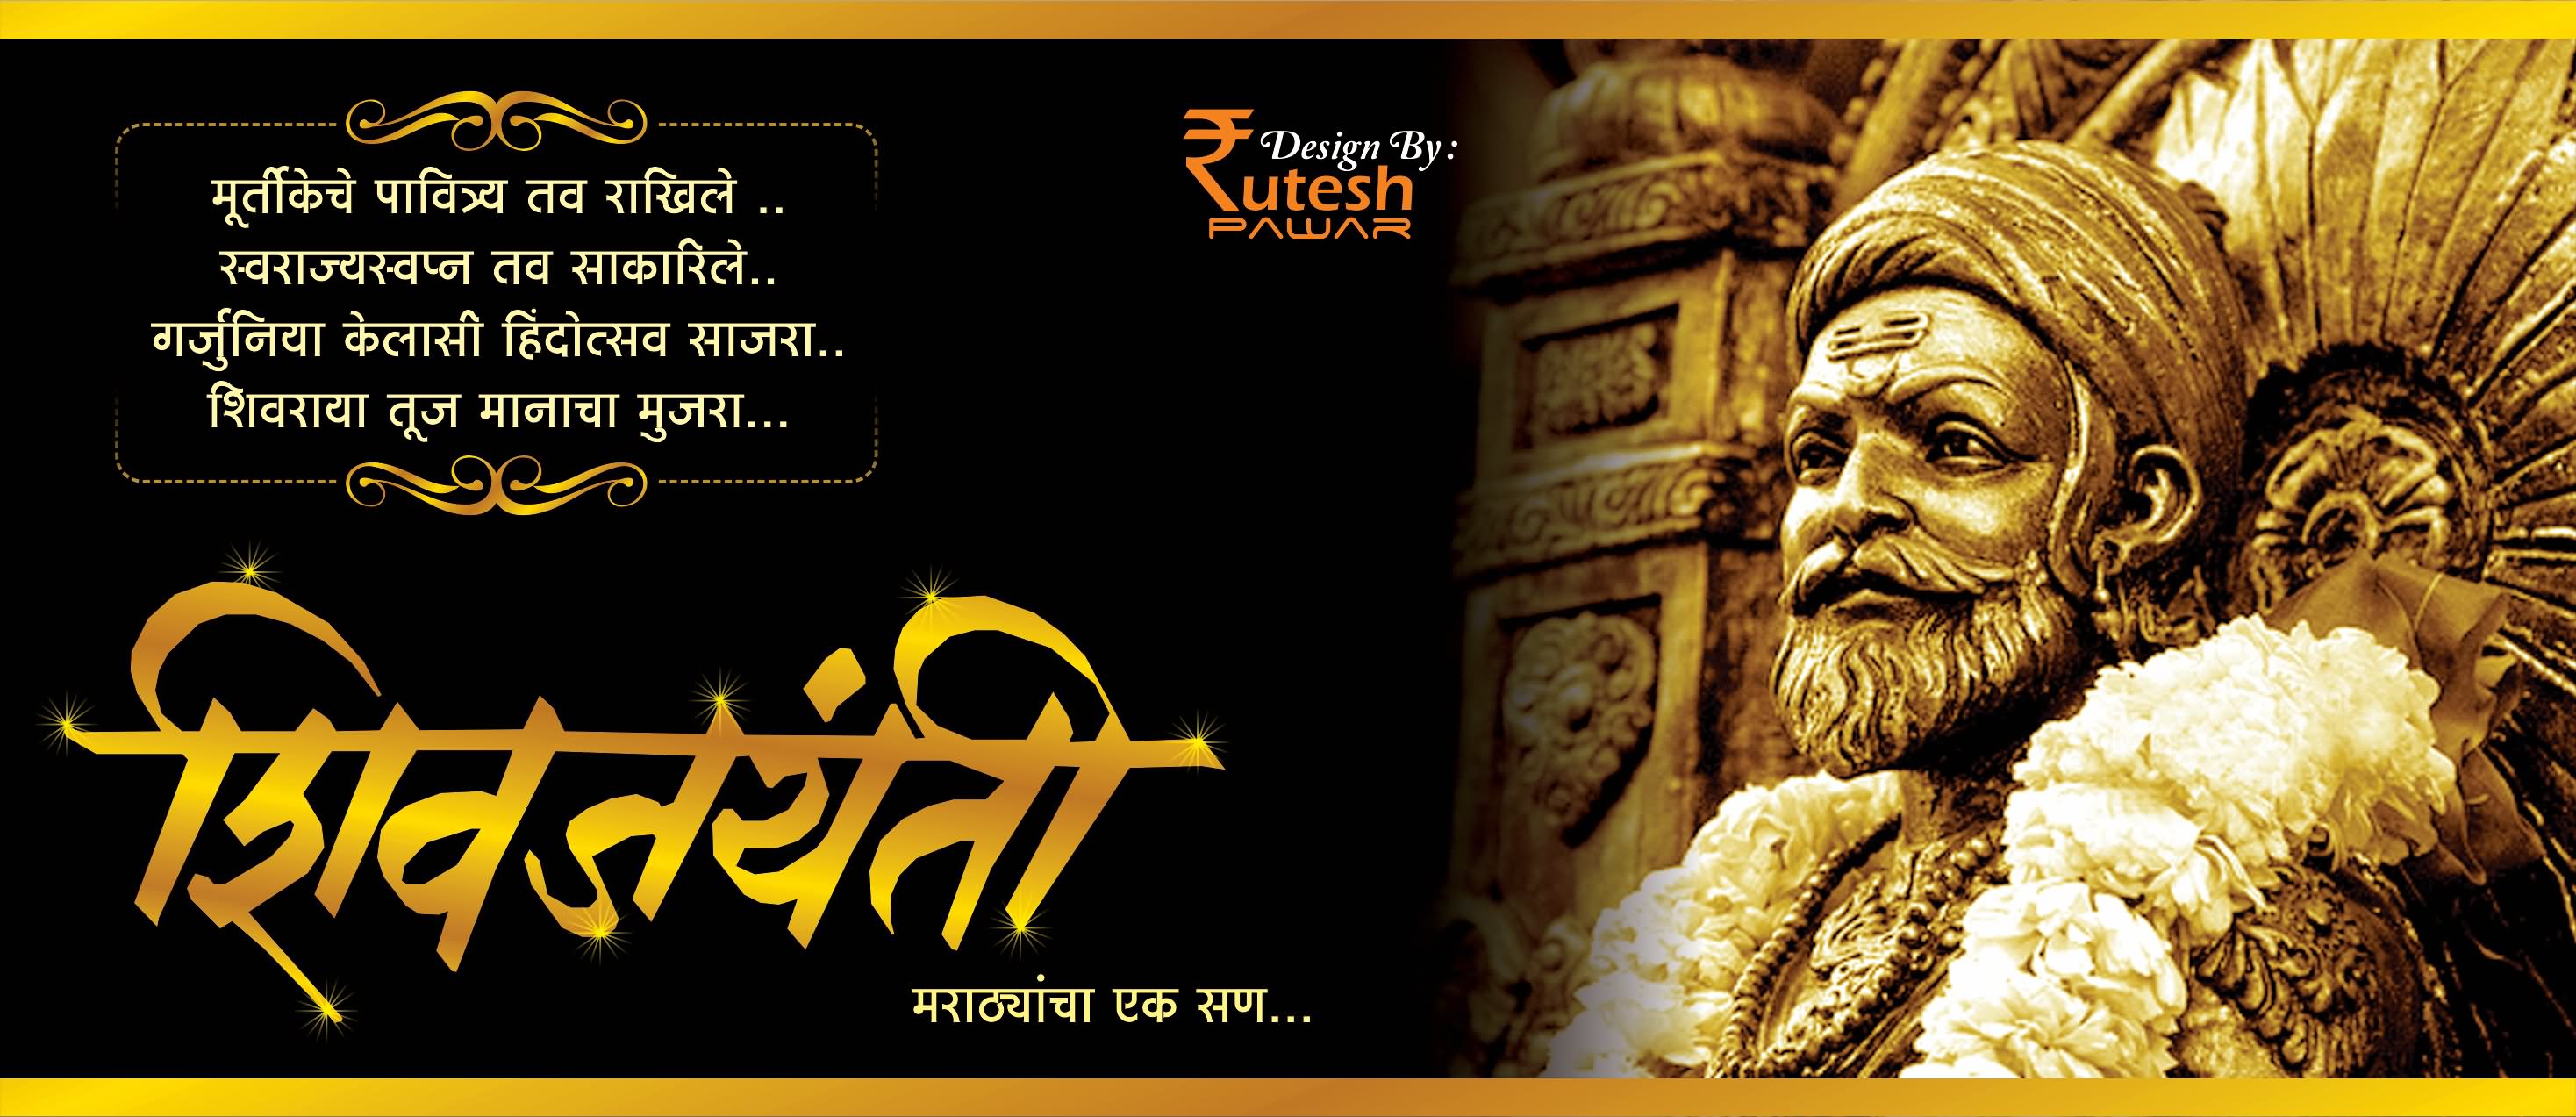 30 Most Wonderful Shivaji Jayanti Wish Pictures And Images